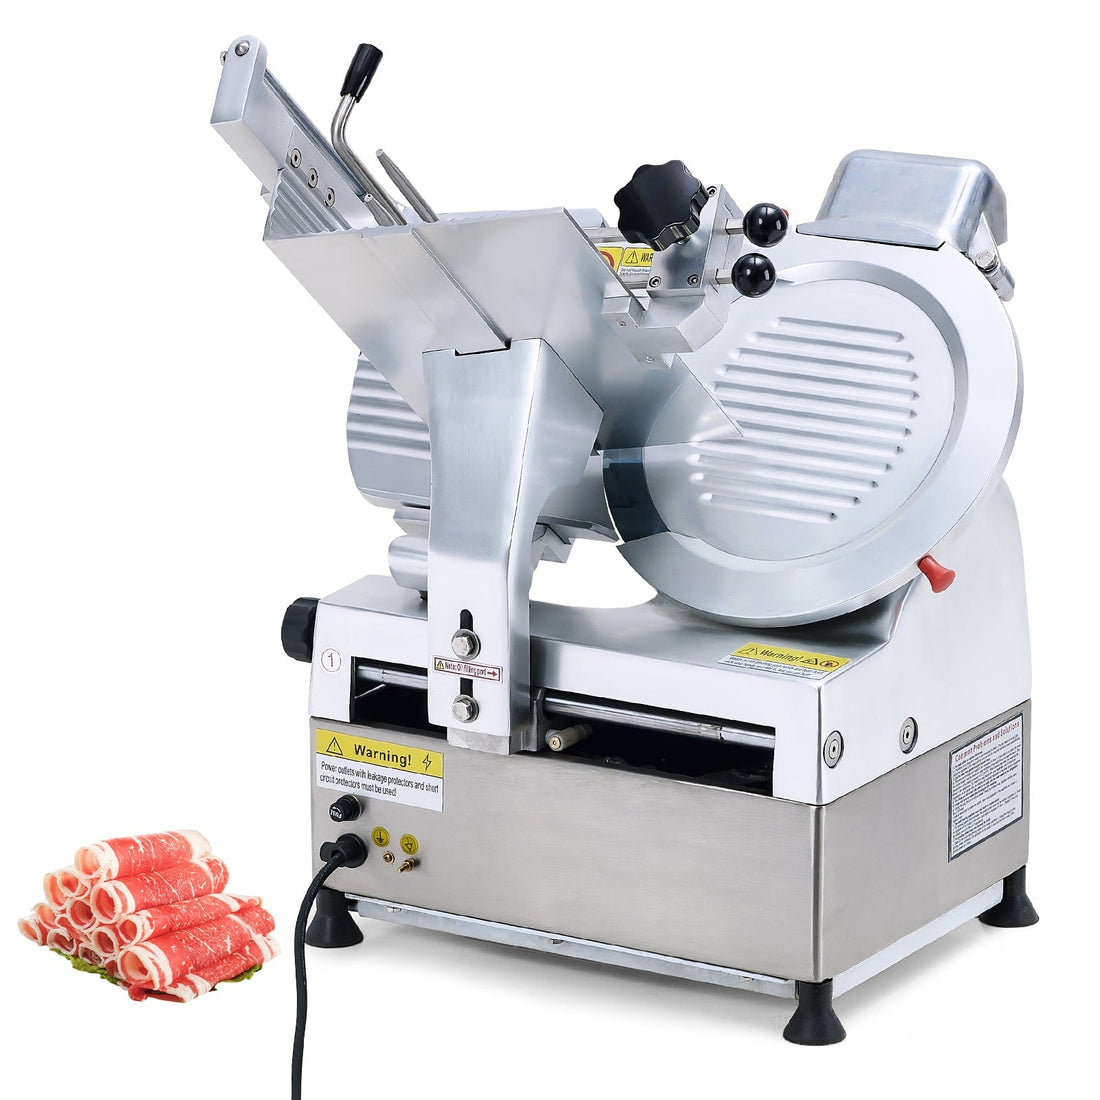 550W Automatic Meat Slicer Deli Slicer with 12 Inch Carbon Steel Blade Meat Slicer Machine